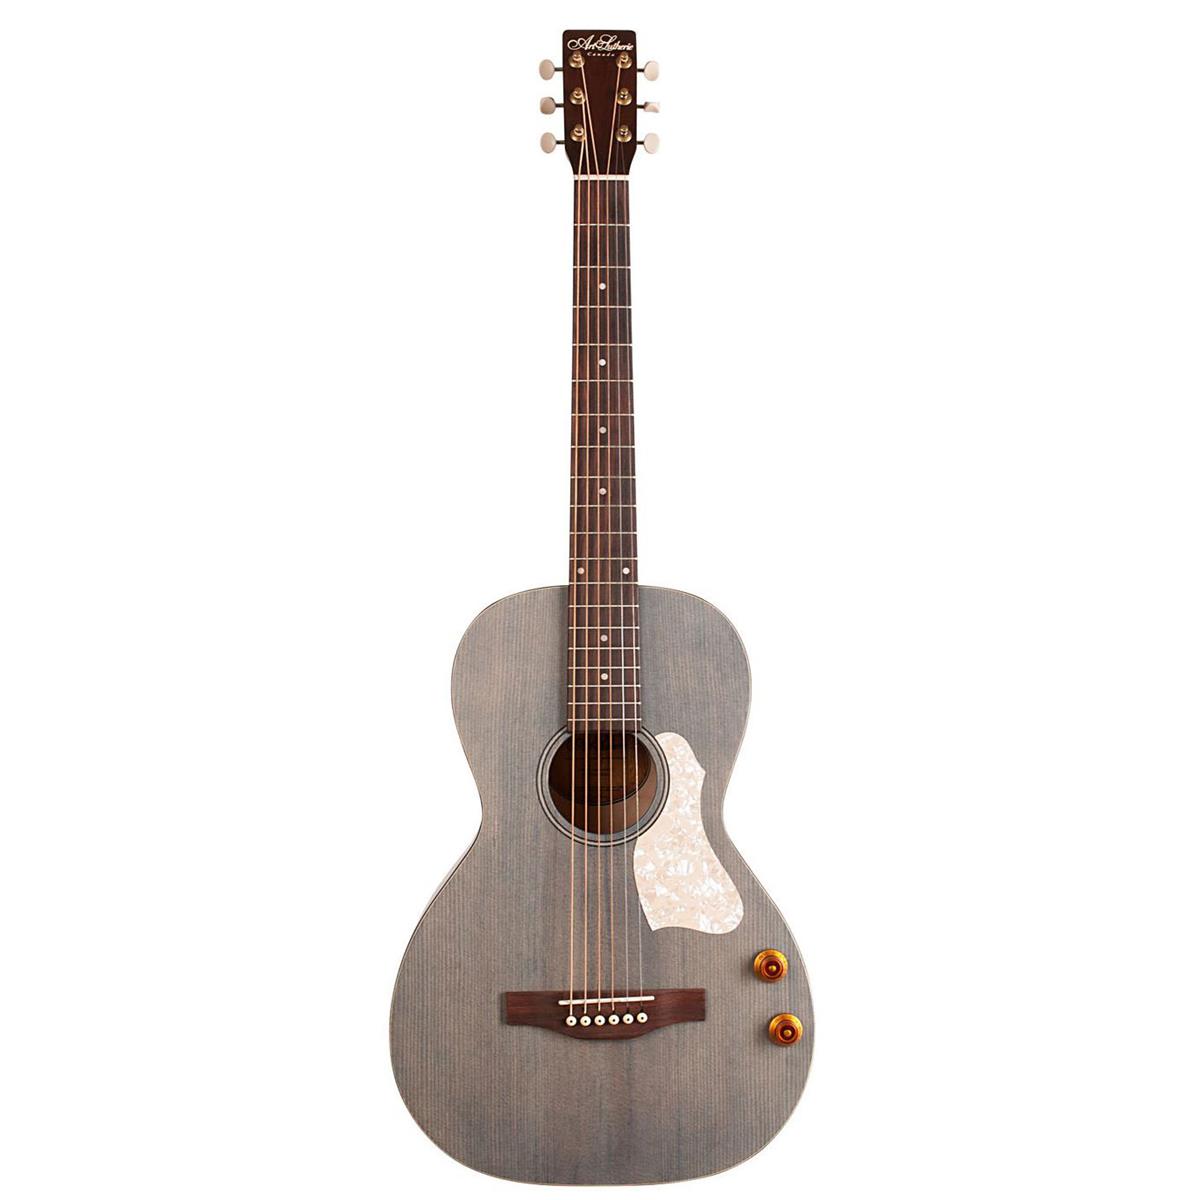 Art & Lutherie Roadhouse Q-Discrete Parlor AE Guitar, Rosewood, Denim Blue -  Art & Lutherie, 047079